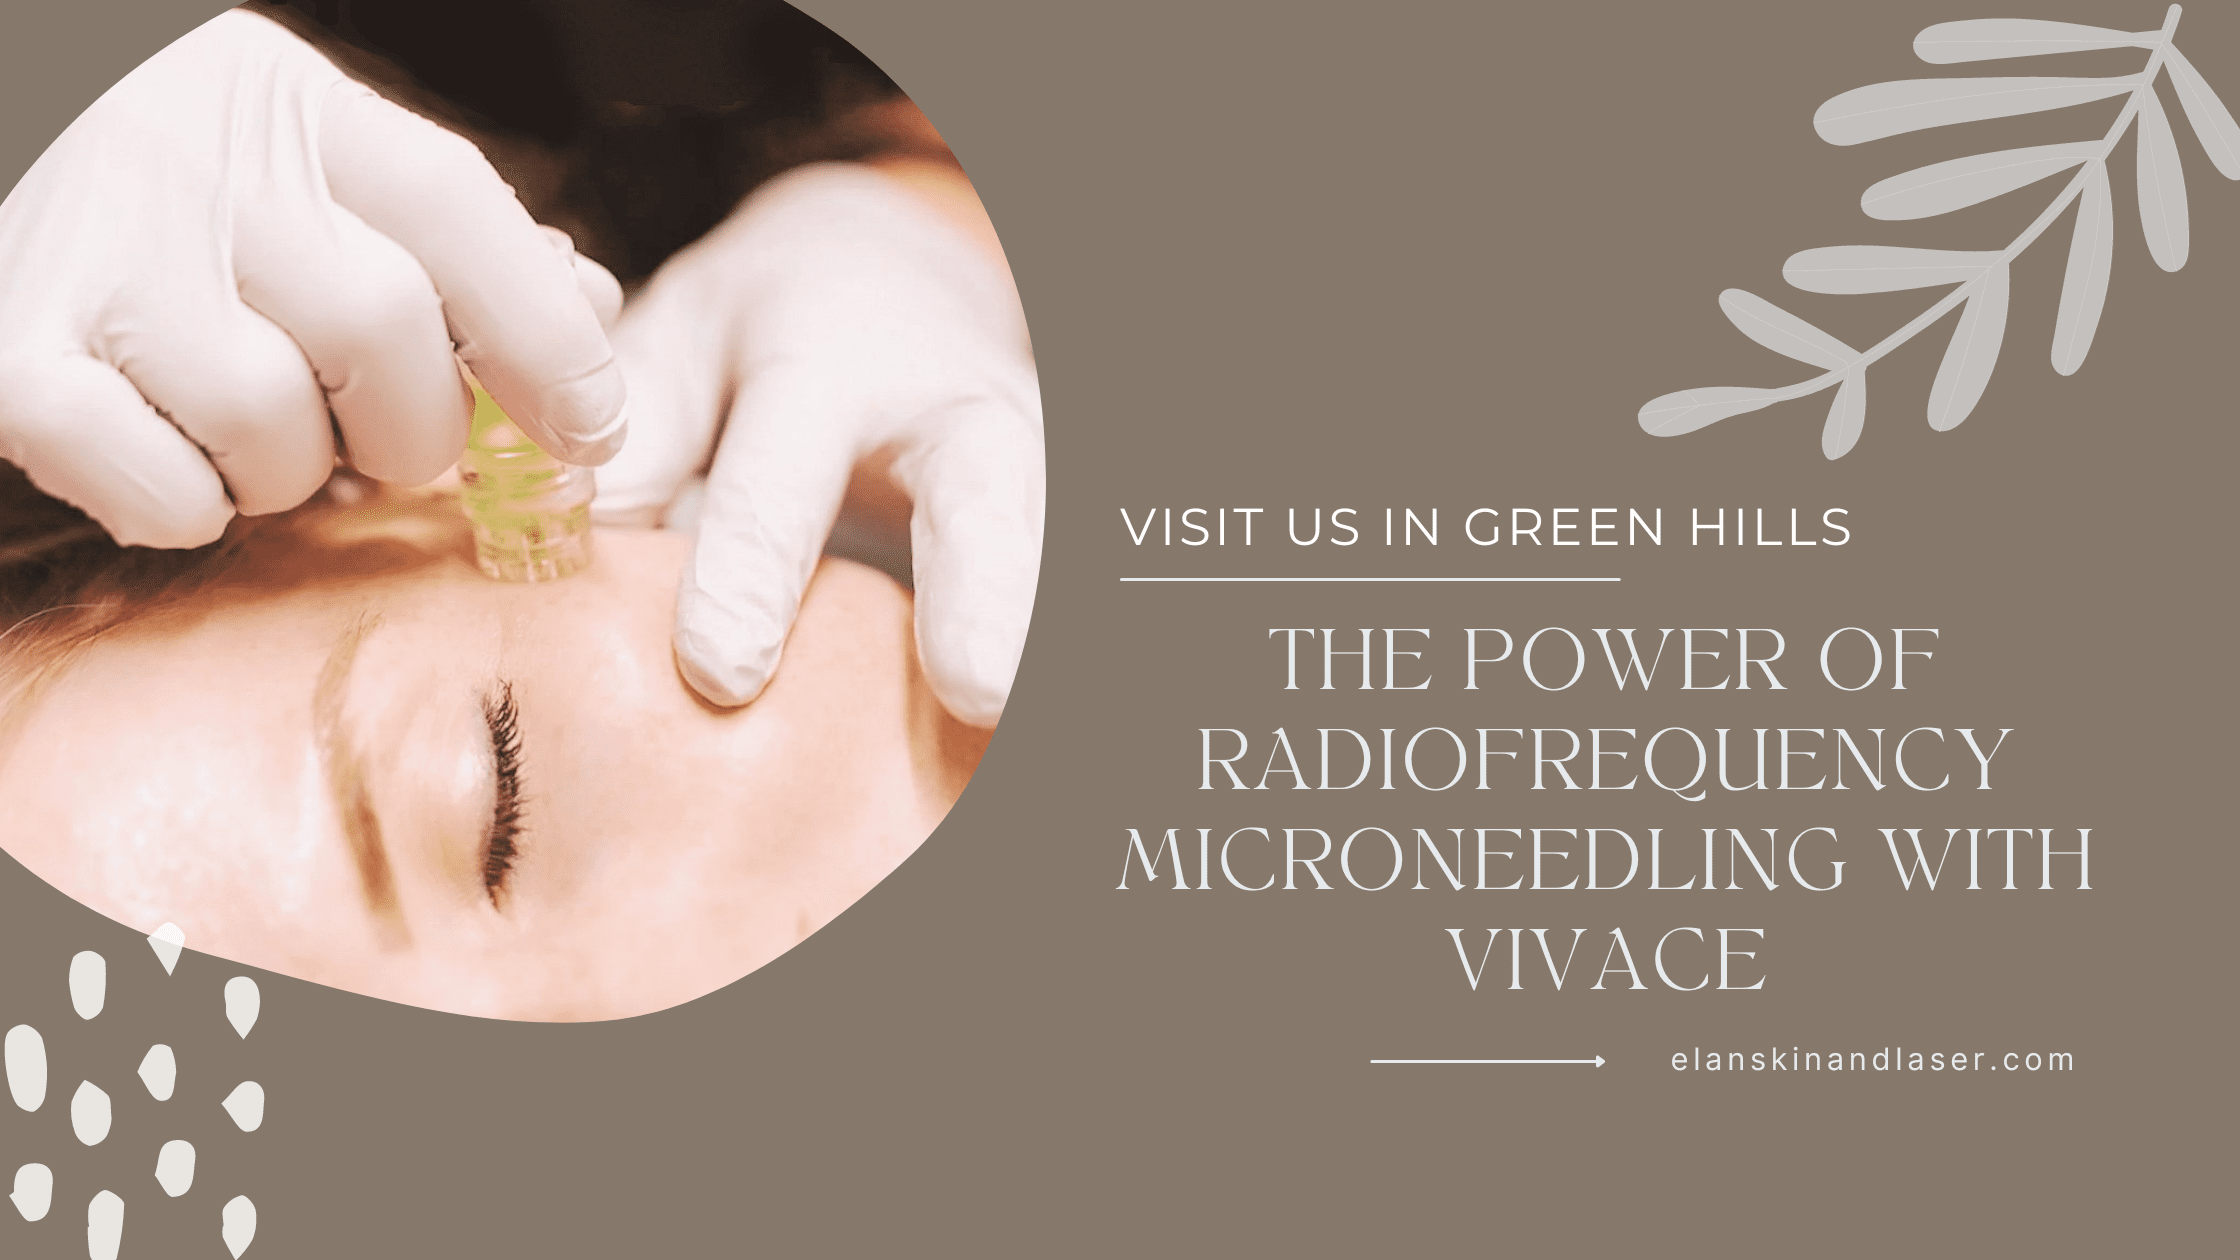 The Power of Radiofrequency Microneedling with Vivace